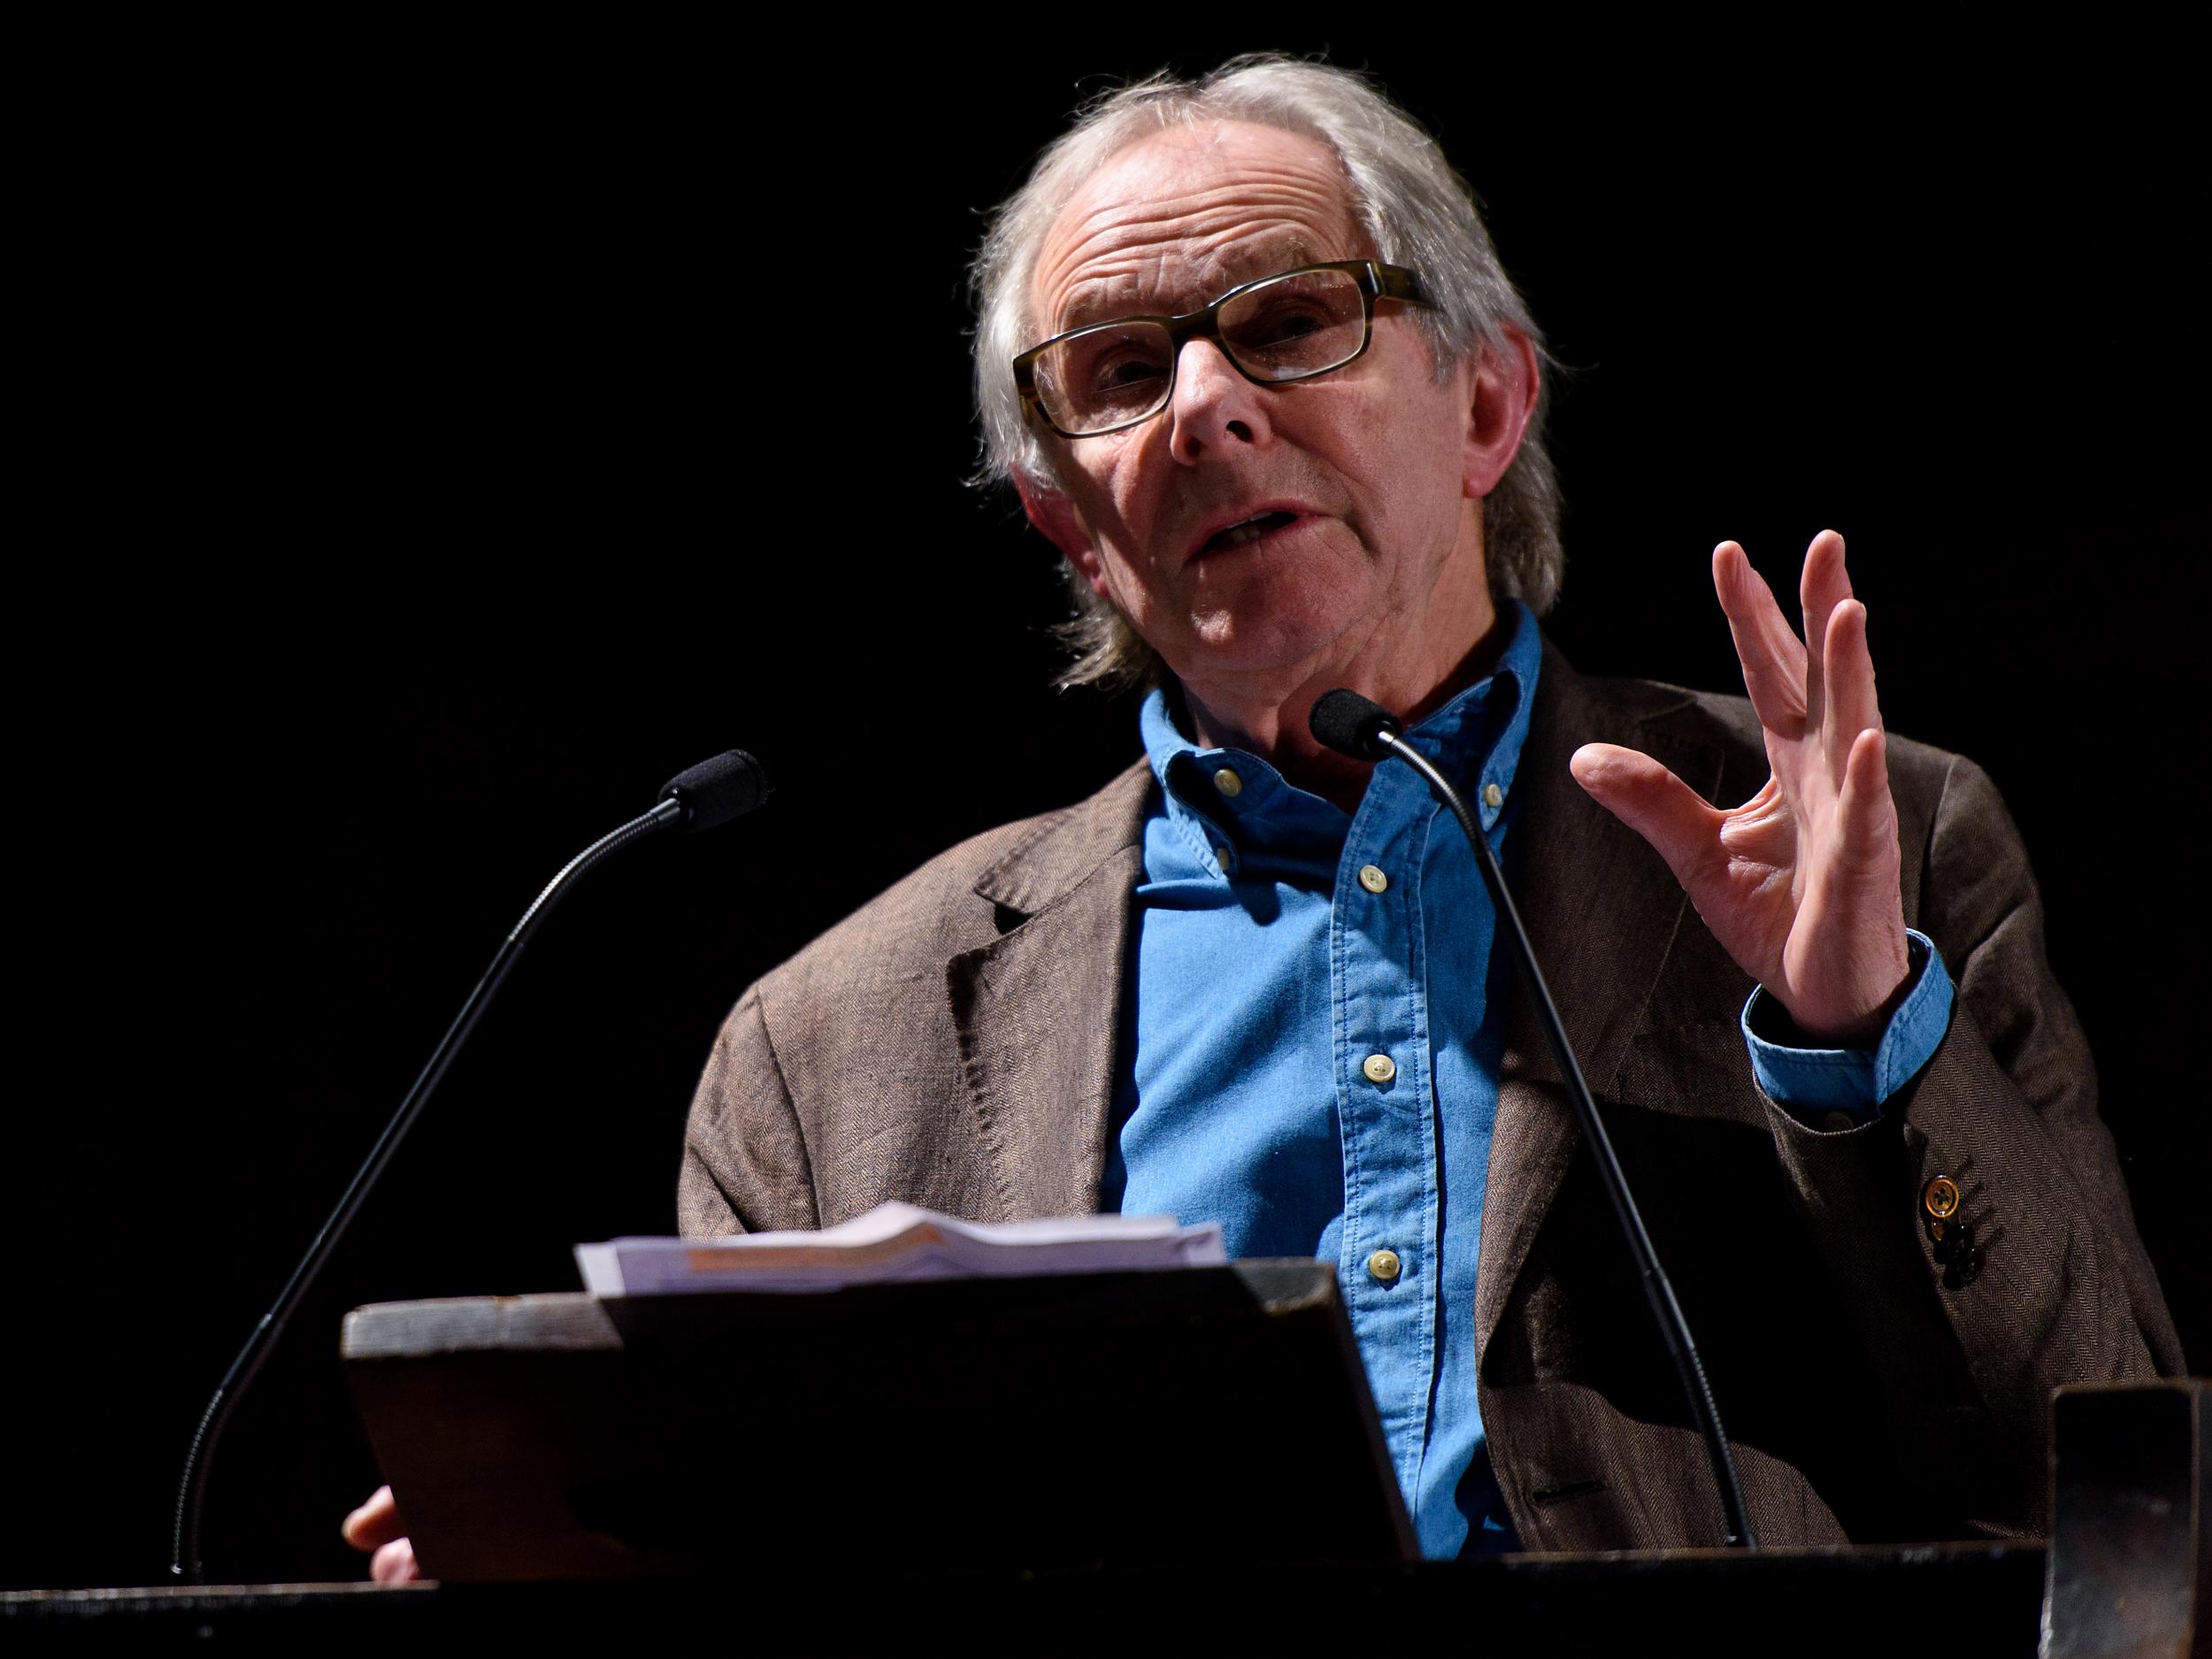 Ken Loach is said to have made the comments during a screening of his most recent film